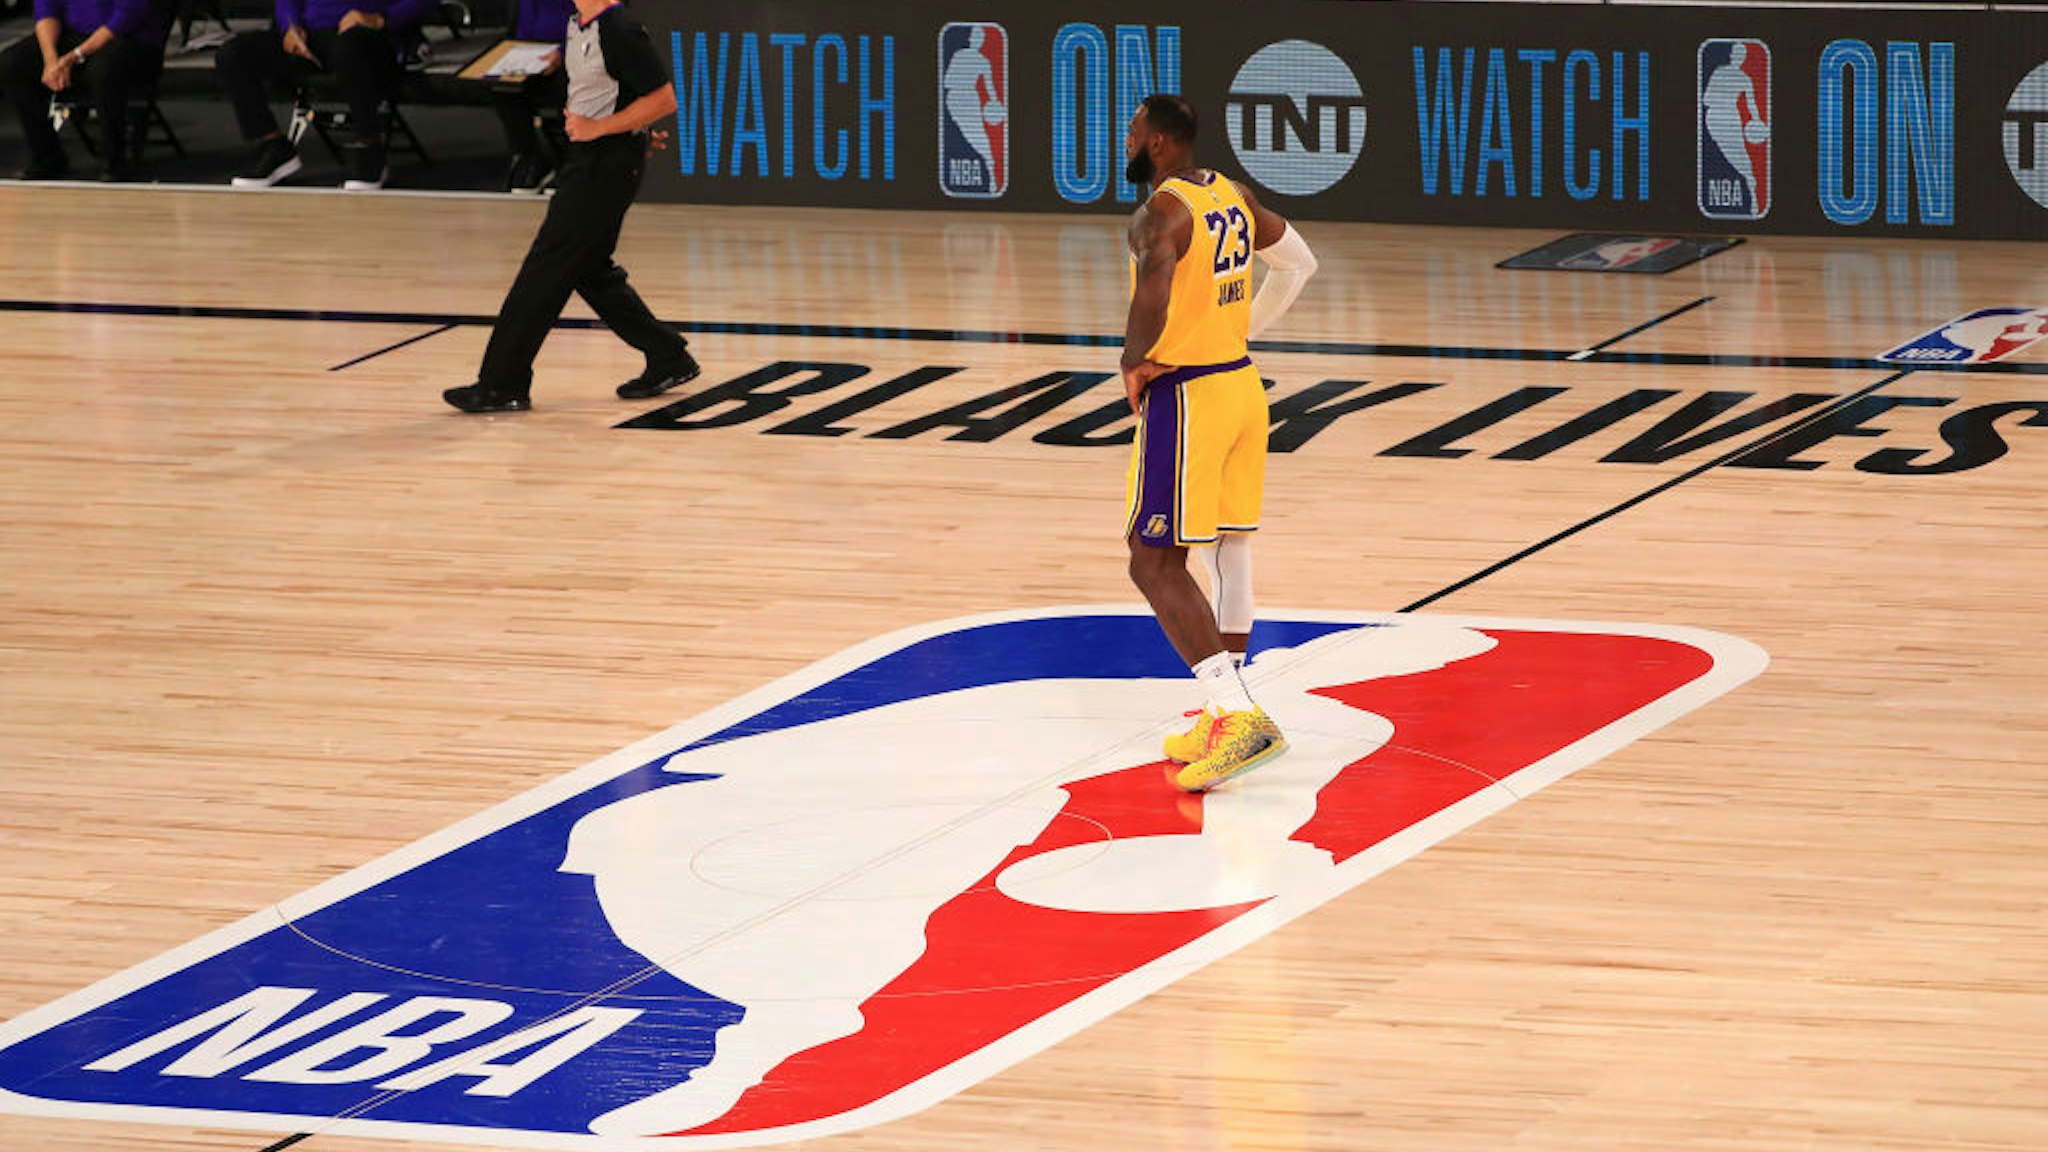 LAKE BUENA VISTA, FLORIDA - JULY 30: LeBron James #23 of the Los Angeles Lakers stands on the NBA logo against the LA Clippers during the second quarter of the game at The Arena at ESPN Wide World Of Sports Complex on July 30, 2020 in Lake Buena Vista, Florida. NOTE TO USER: User expressly acknowledges and agrees that, by downloading and or using this photograph, User is consenting to the terms and conditions of the Getty Images License Agreement. (Photo by Mike Ehrmann/Getty Images)